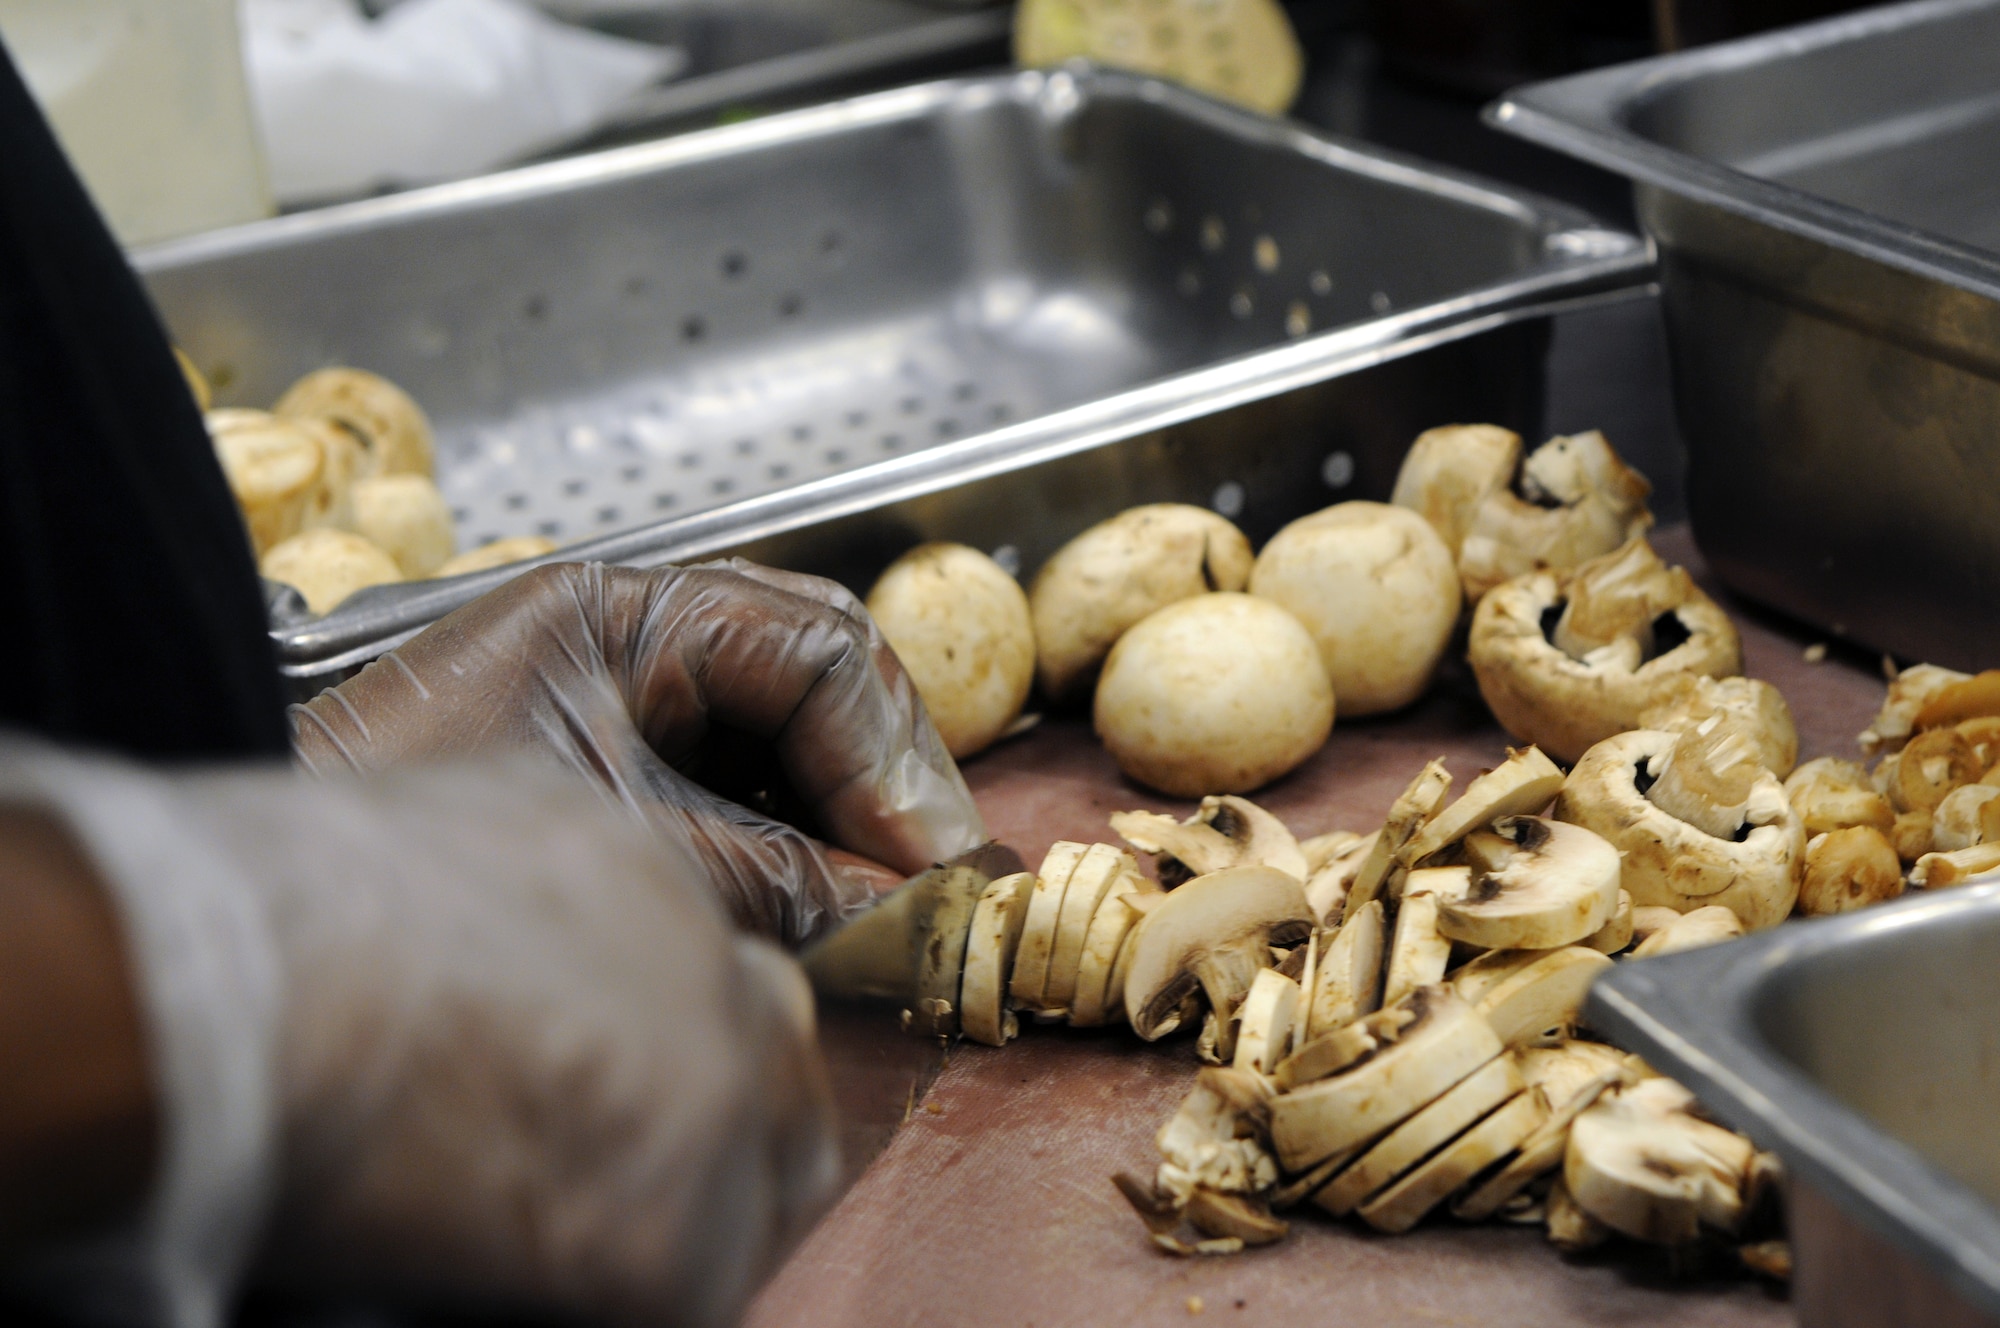 A food service worker chops mushrooms Aug. 23 for the salad bar at the Hercules Dining Facility. The salad bar offers a healthier dining option for warfighters. (Courtesy photo by Ashley Mangin)